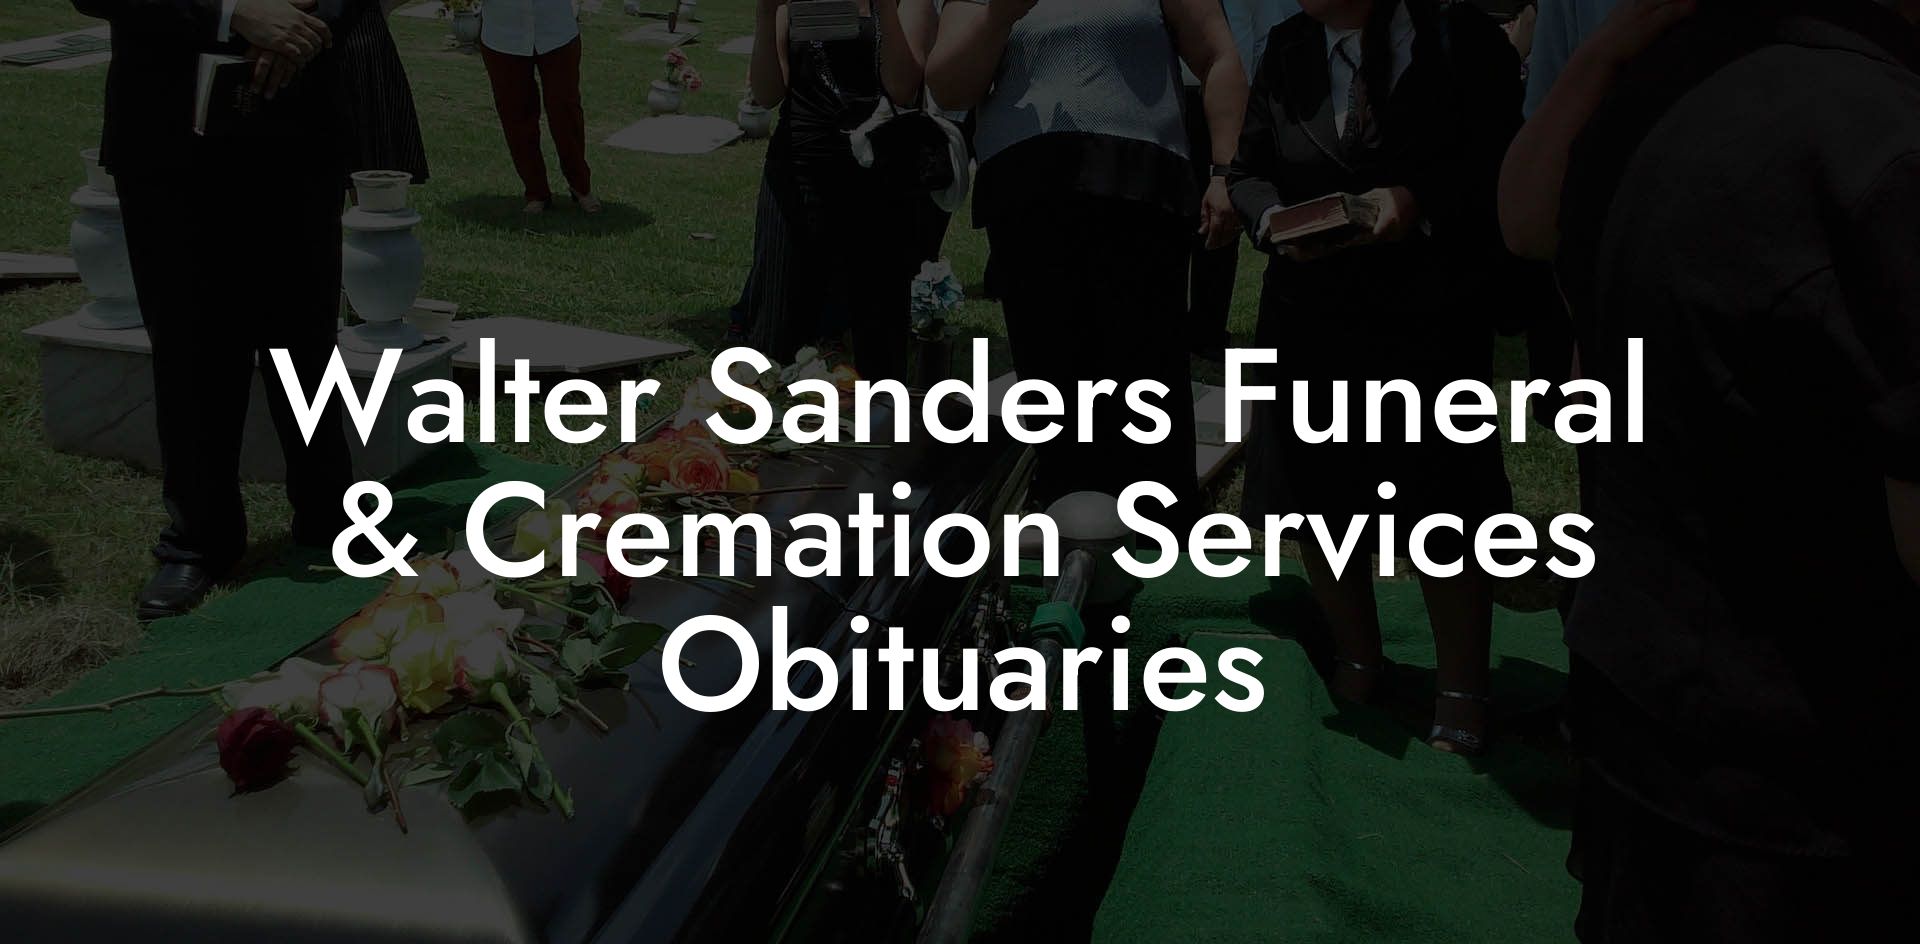 Walter Sanders Funeral & Cremation Services Obituaries